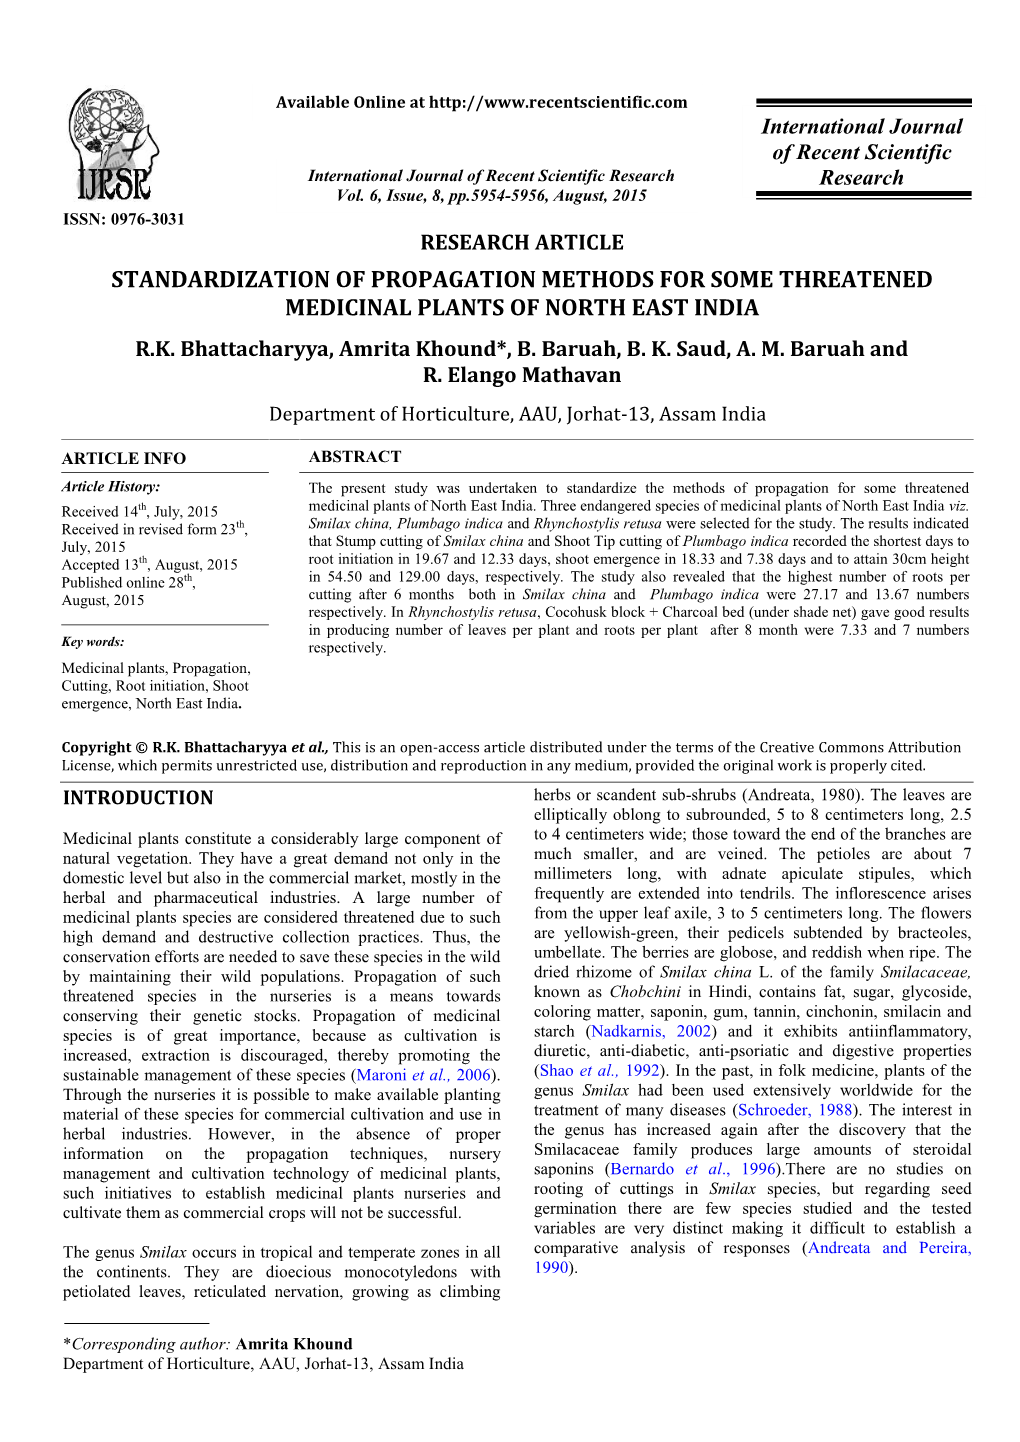 Standardization of Propagation Methods for Some Threatened Medicinal Plants of North East India R.K